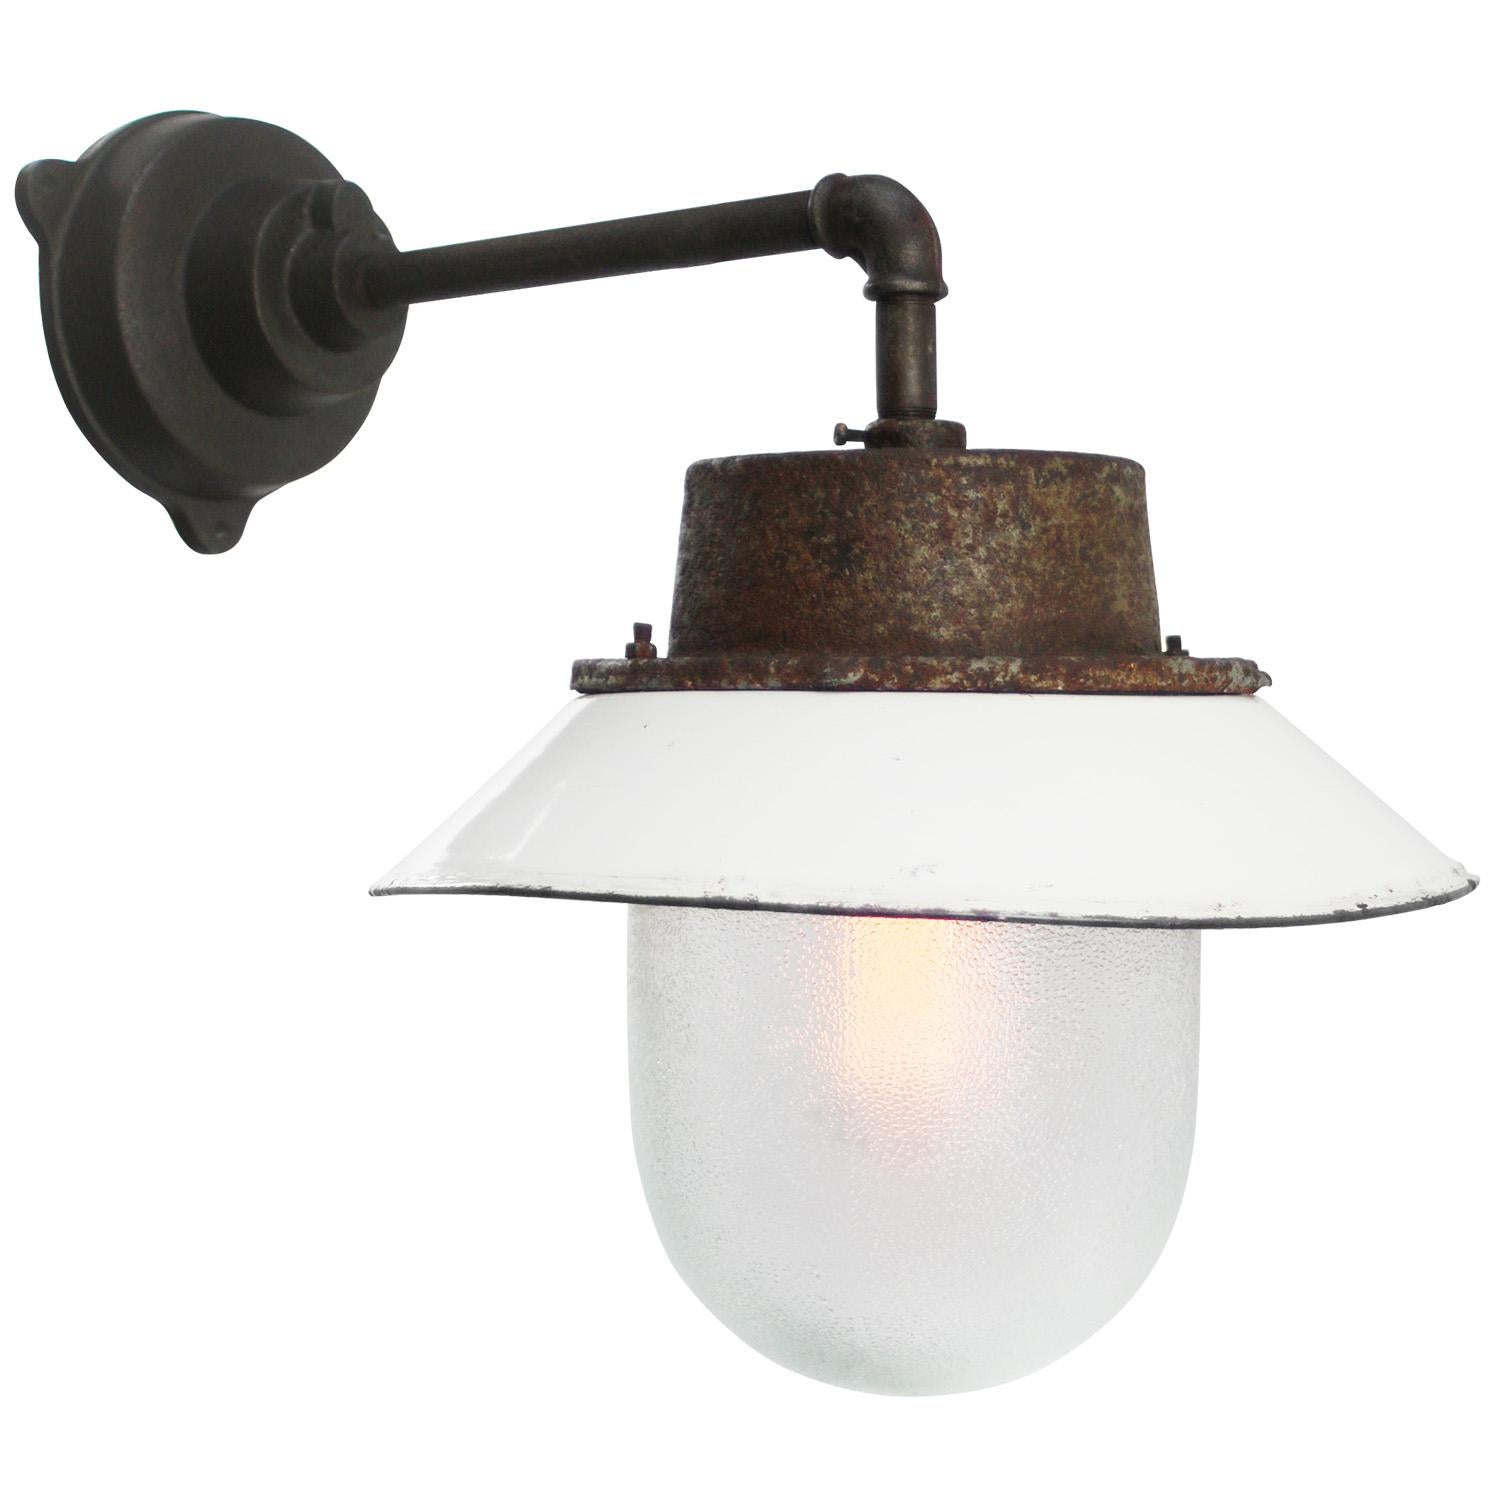 White enamel industrial wall lamp with white interior.
Frosted glass. 

Diameter cast iron wall piece: 12 cm. Three holes to secure.

Weight: 6.70 kg / 14.8 lb

Priced per individual item. All lamps have been made suitable by international standards